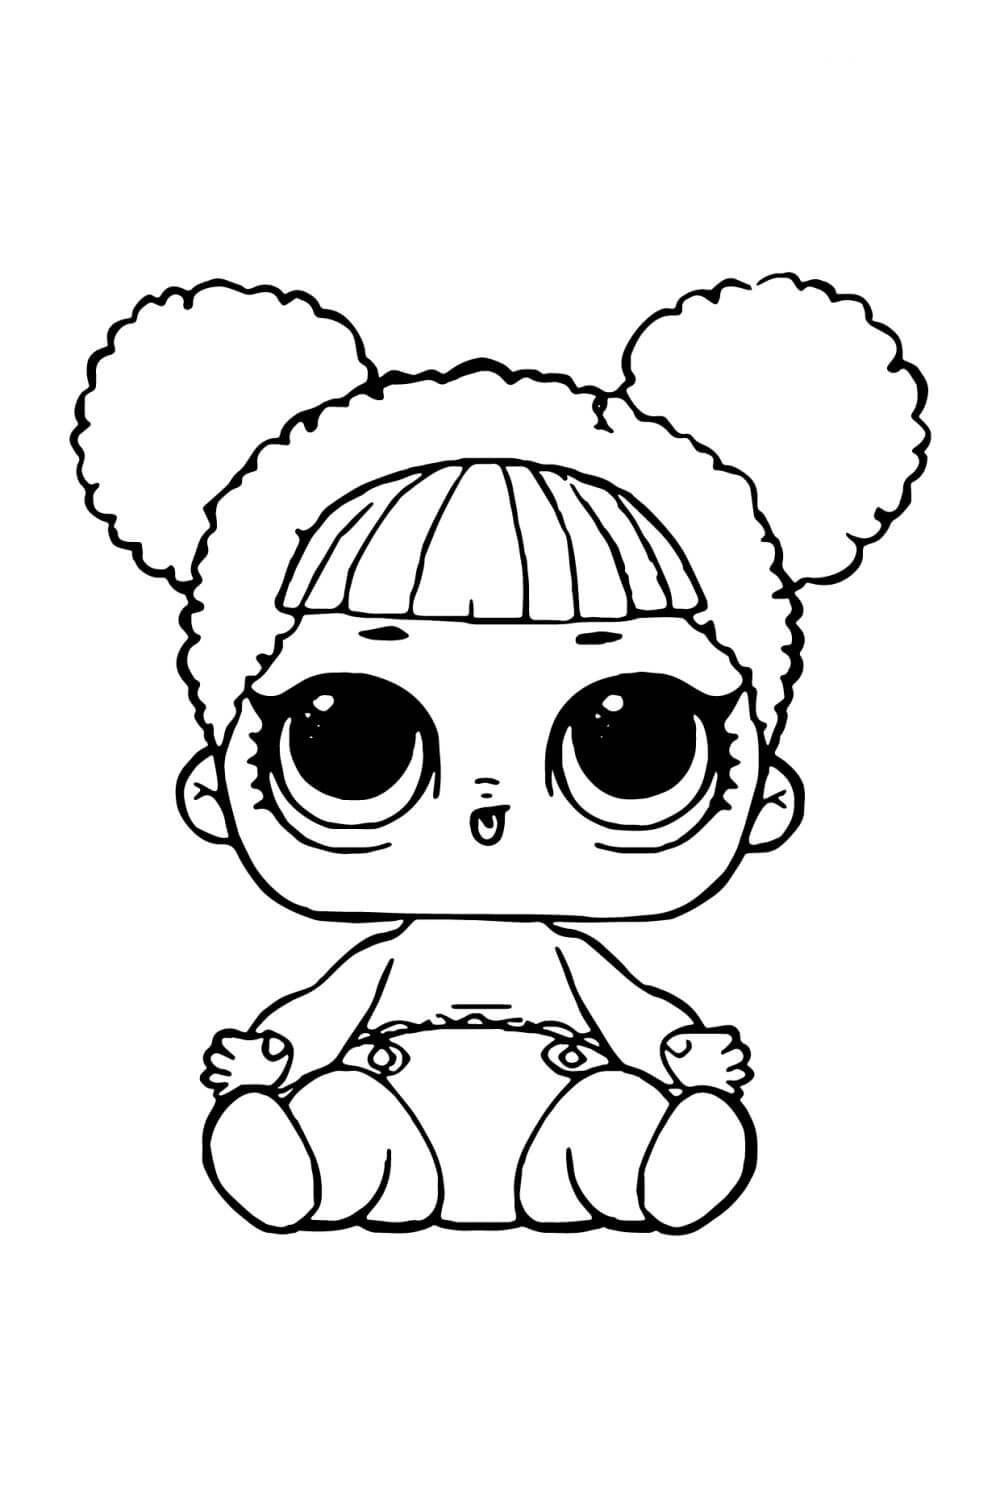 LOL Baby Dawn Coloring Page - Free Printable Coloring Pages for Kids